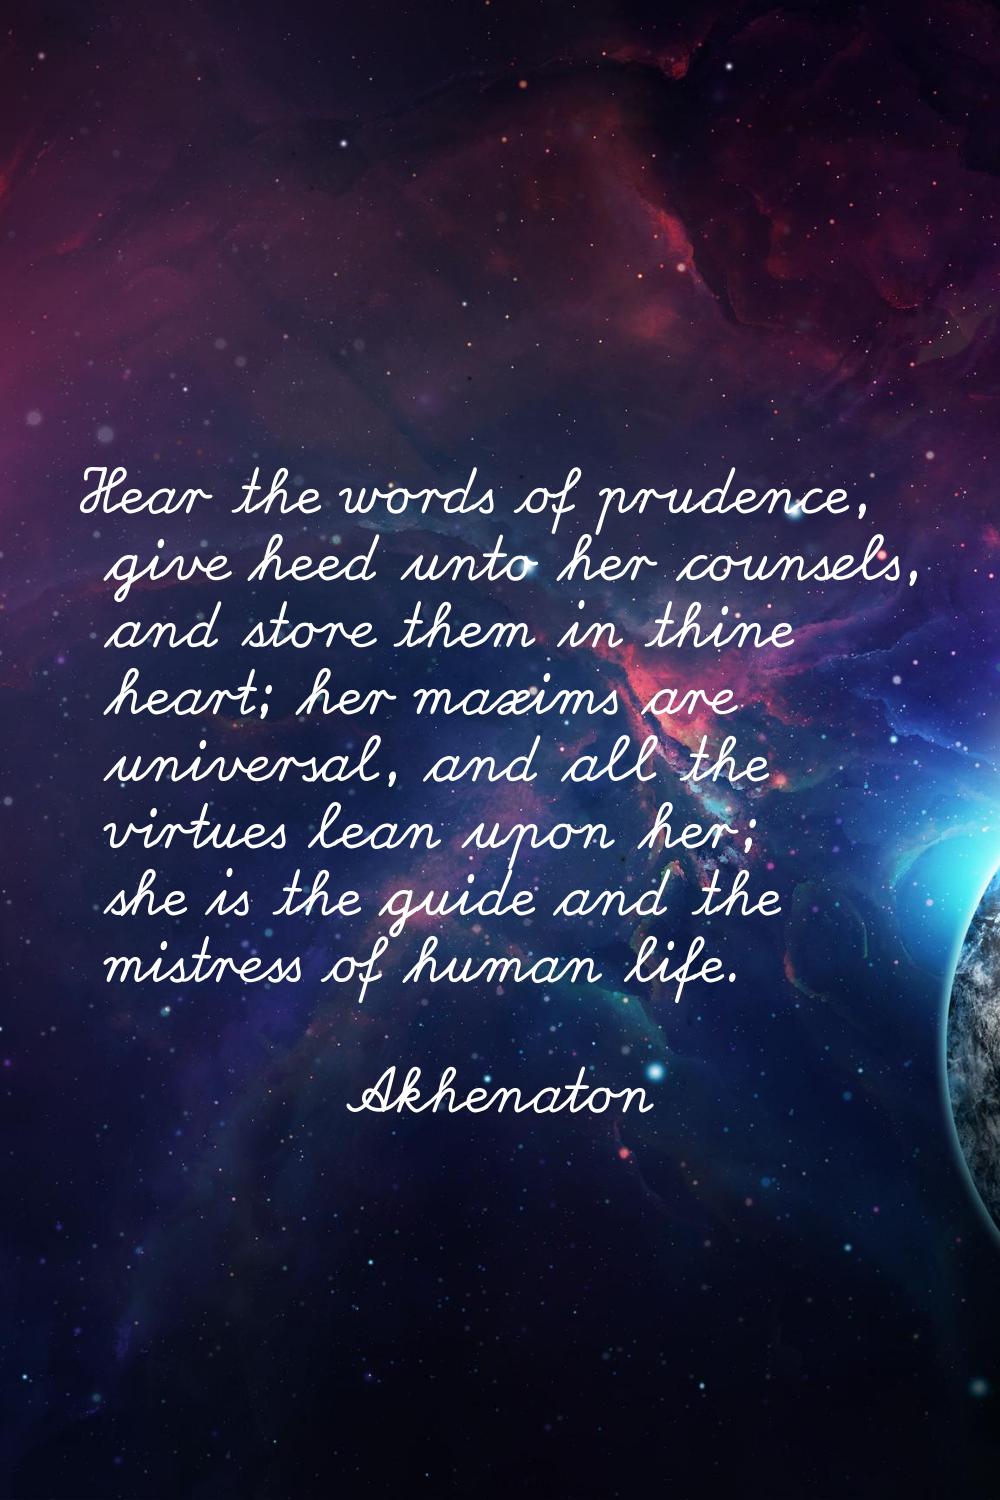 Hear the words of prudence, give heed unto her counsels, and store them in thine heart; her maxims 